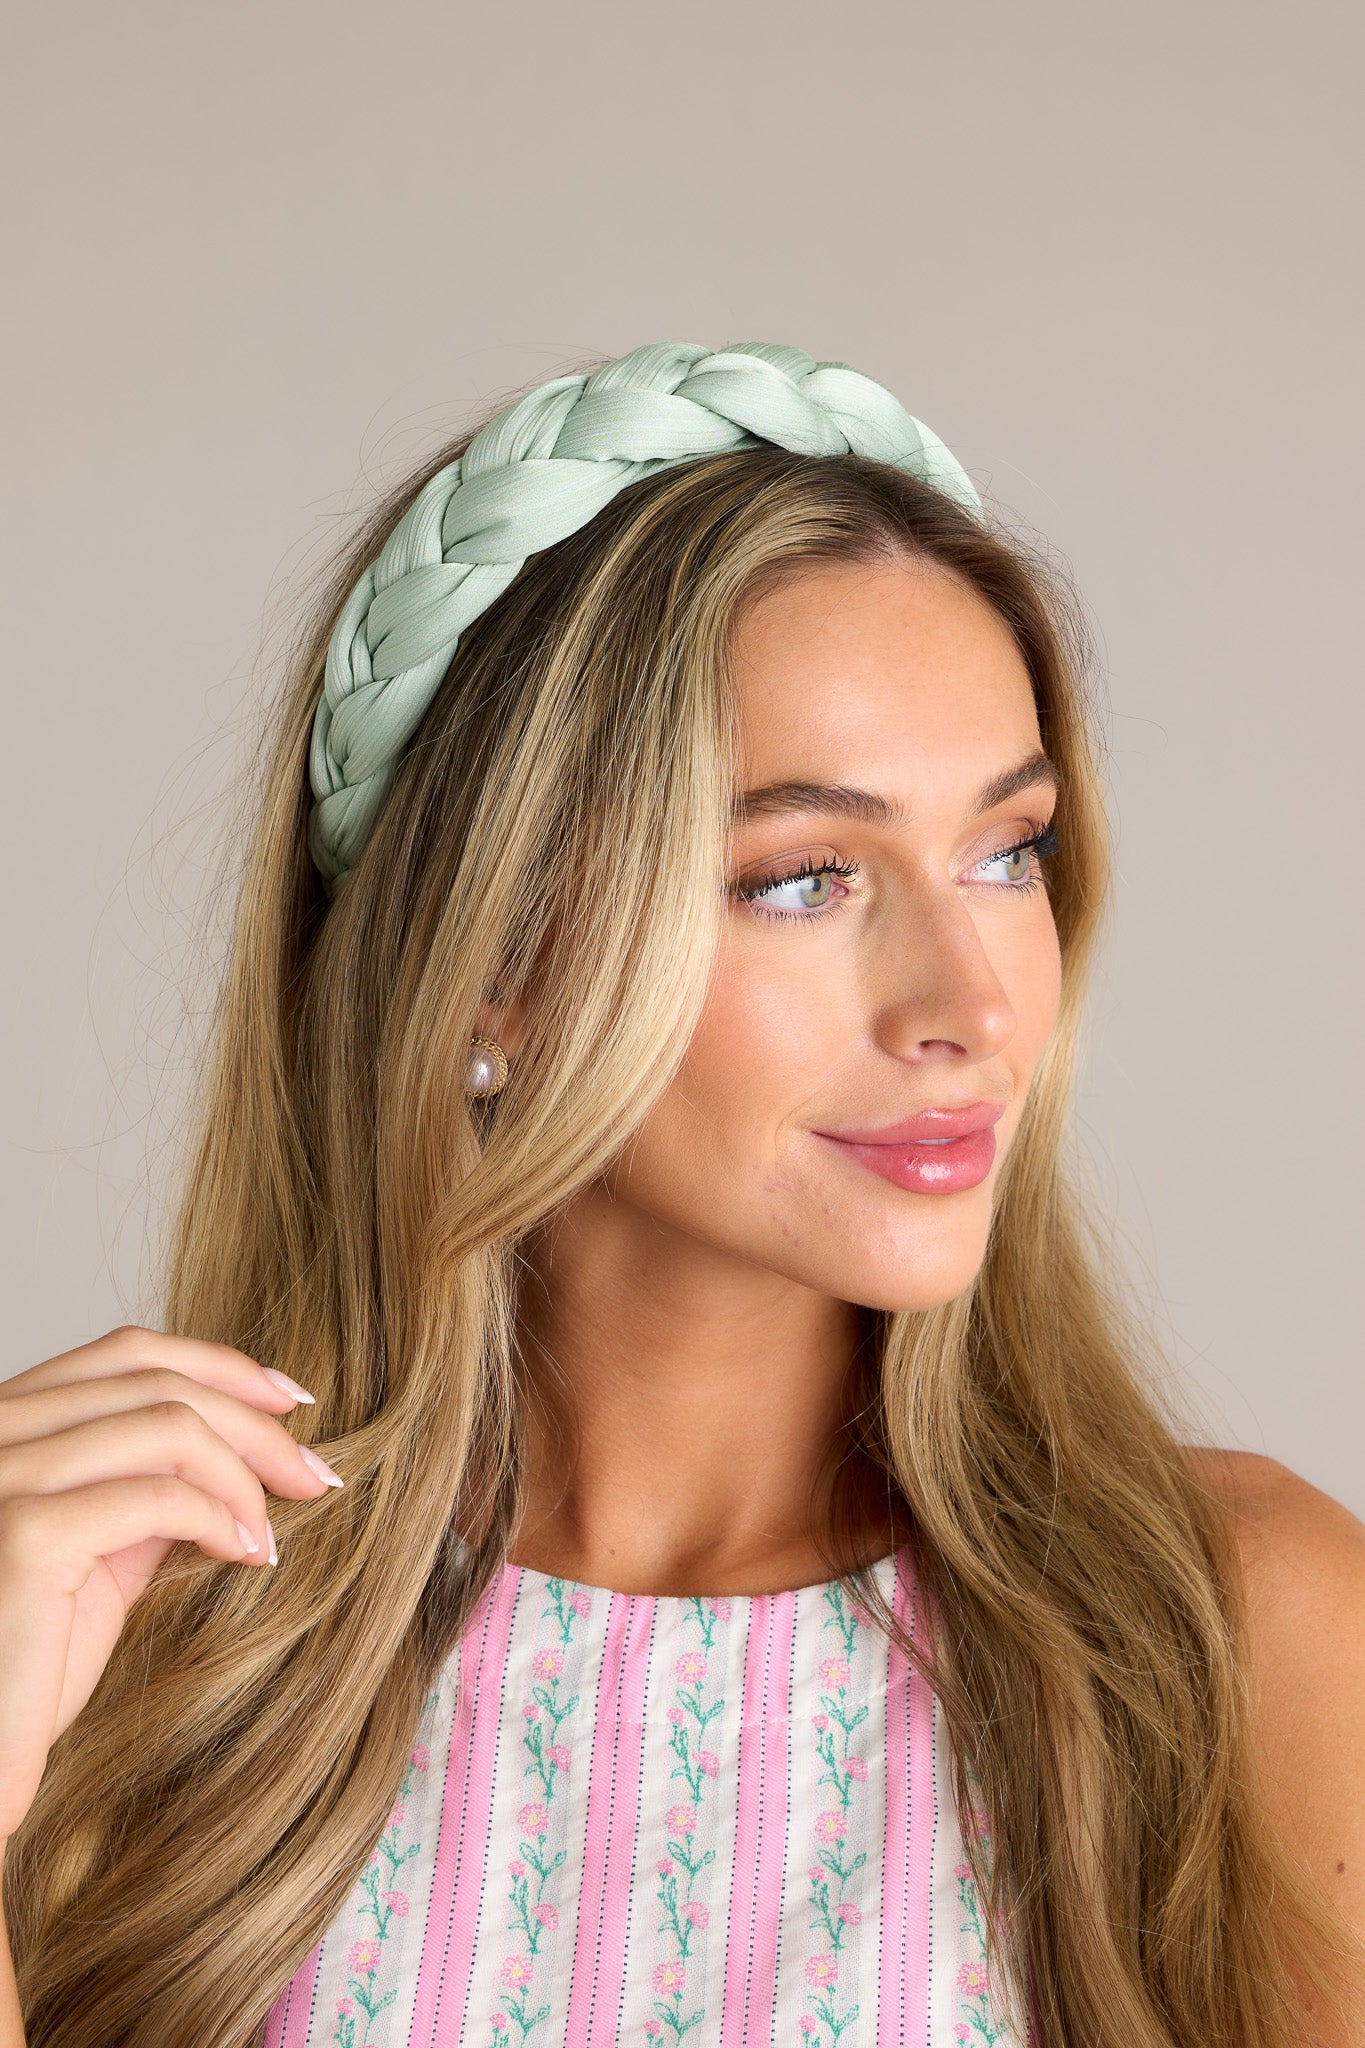 This headband features a thick, soft material, and a braided texture.